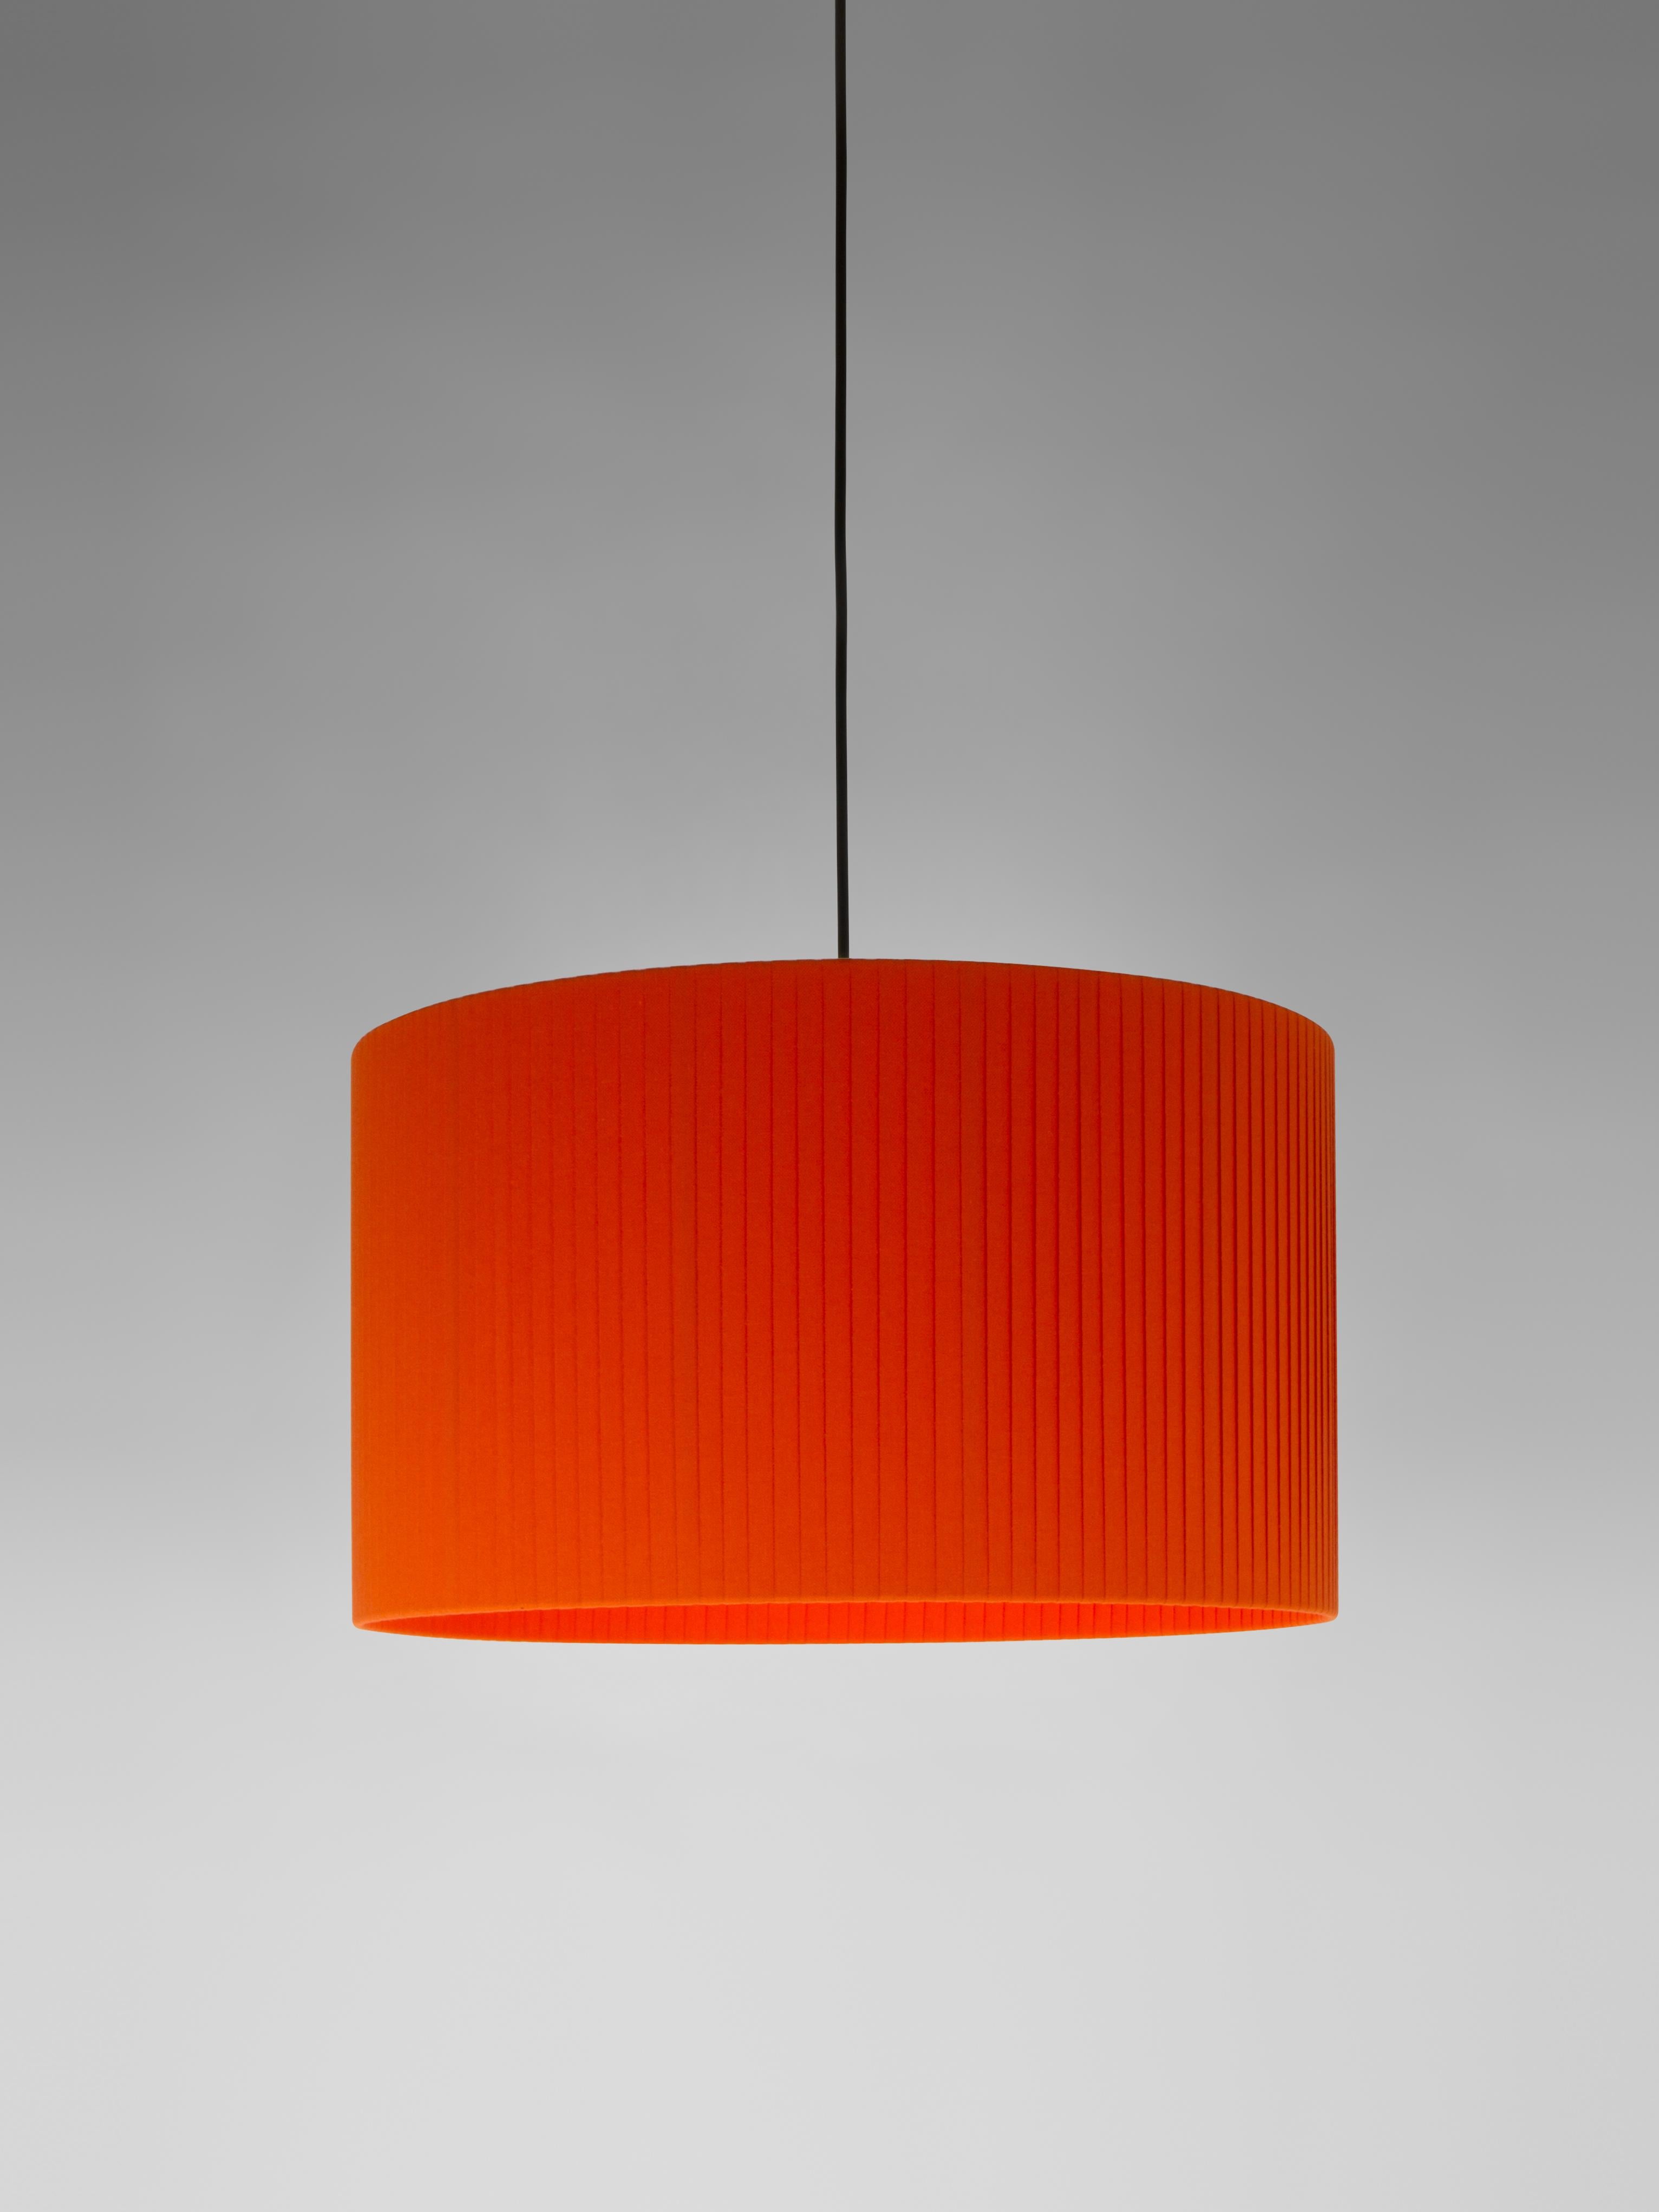 Red Sísísí Cilíndricas GT2 pendant lamp by Santa & Cole
Dimensions: D 45 x H 27 cm
Materials: Metal, ribbon.
Available in other colors.
Also available in two lights version.

Cylindrical in shape, there are two sizes: the PT2 being the small